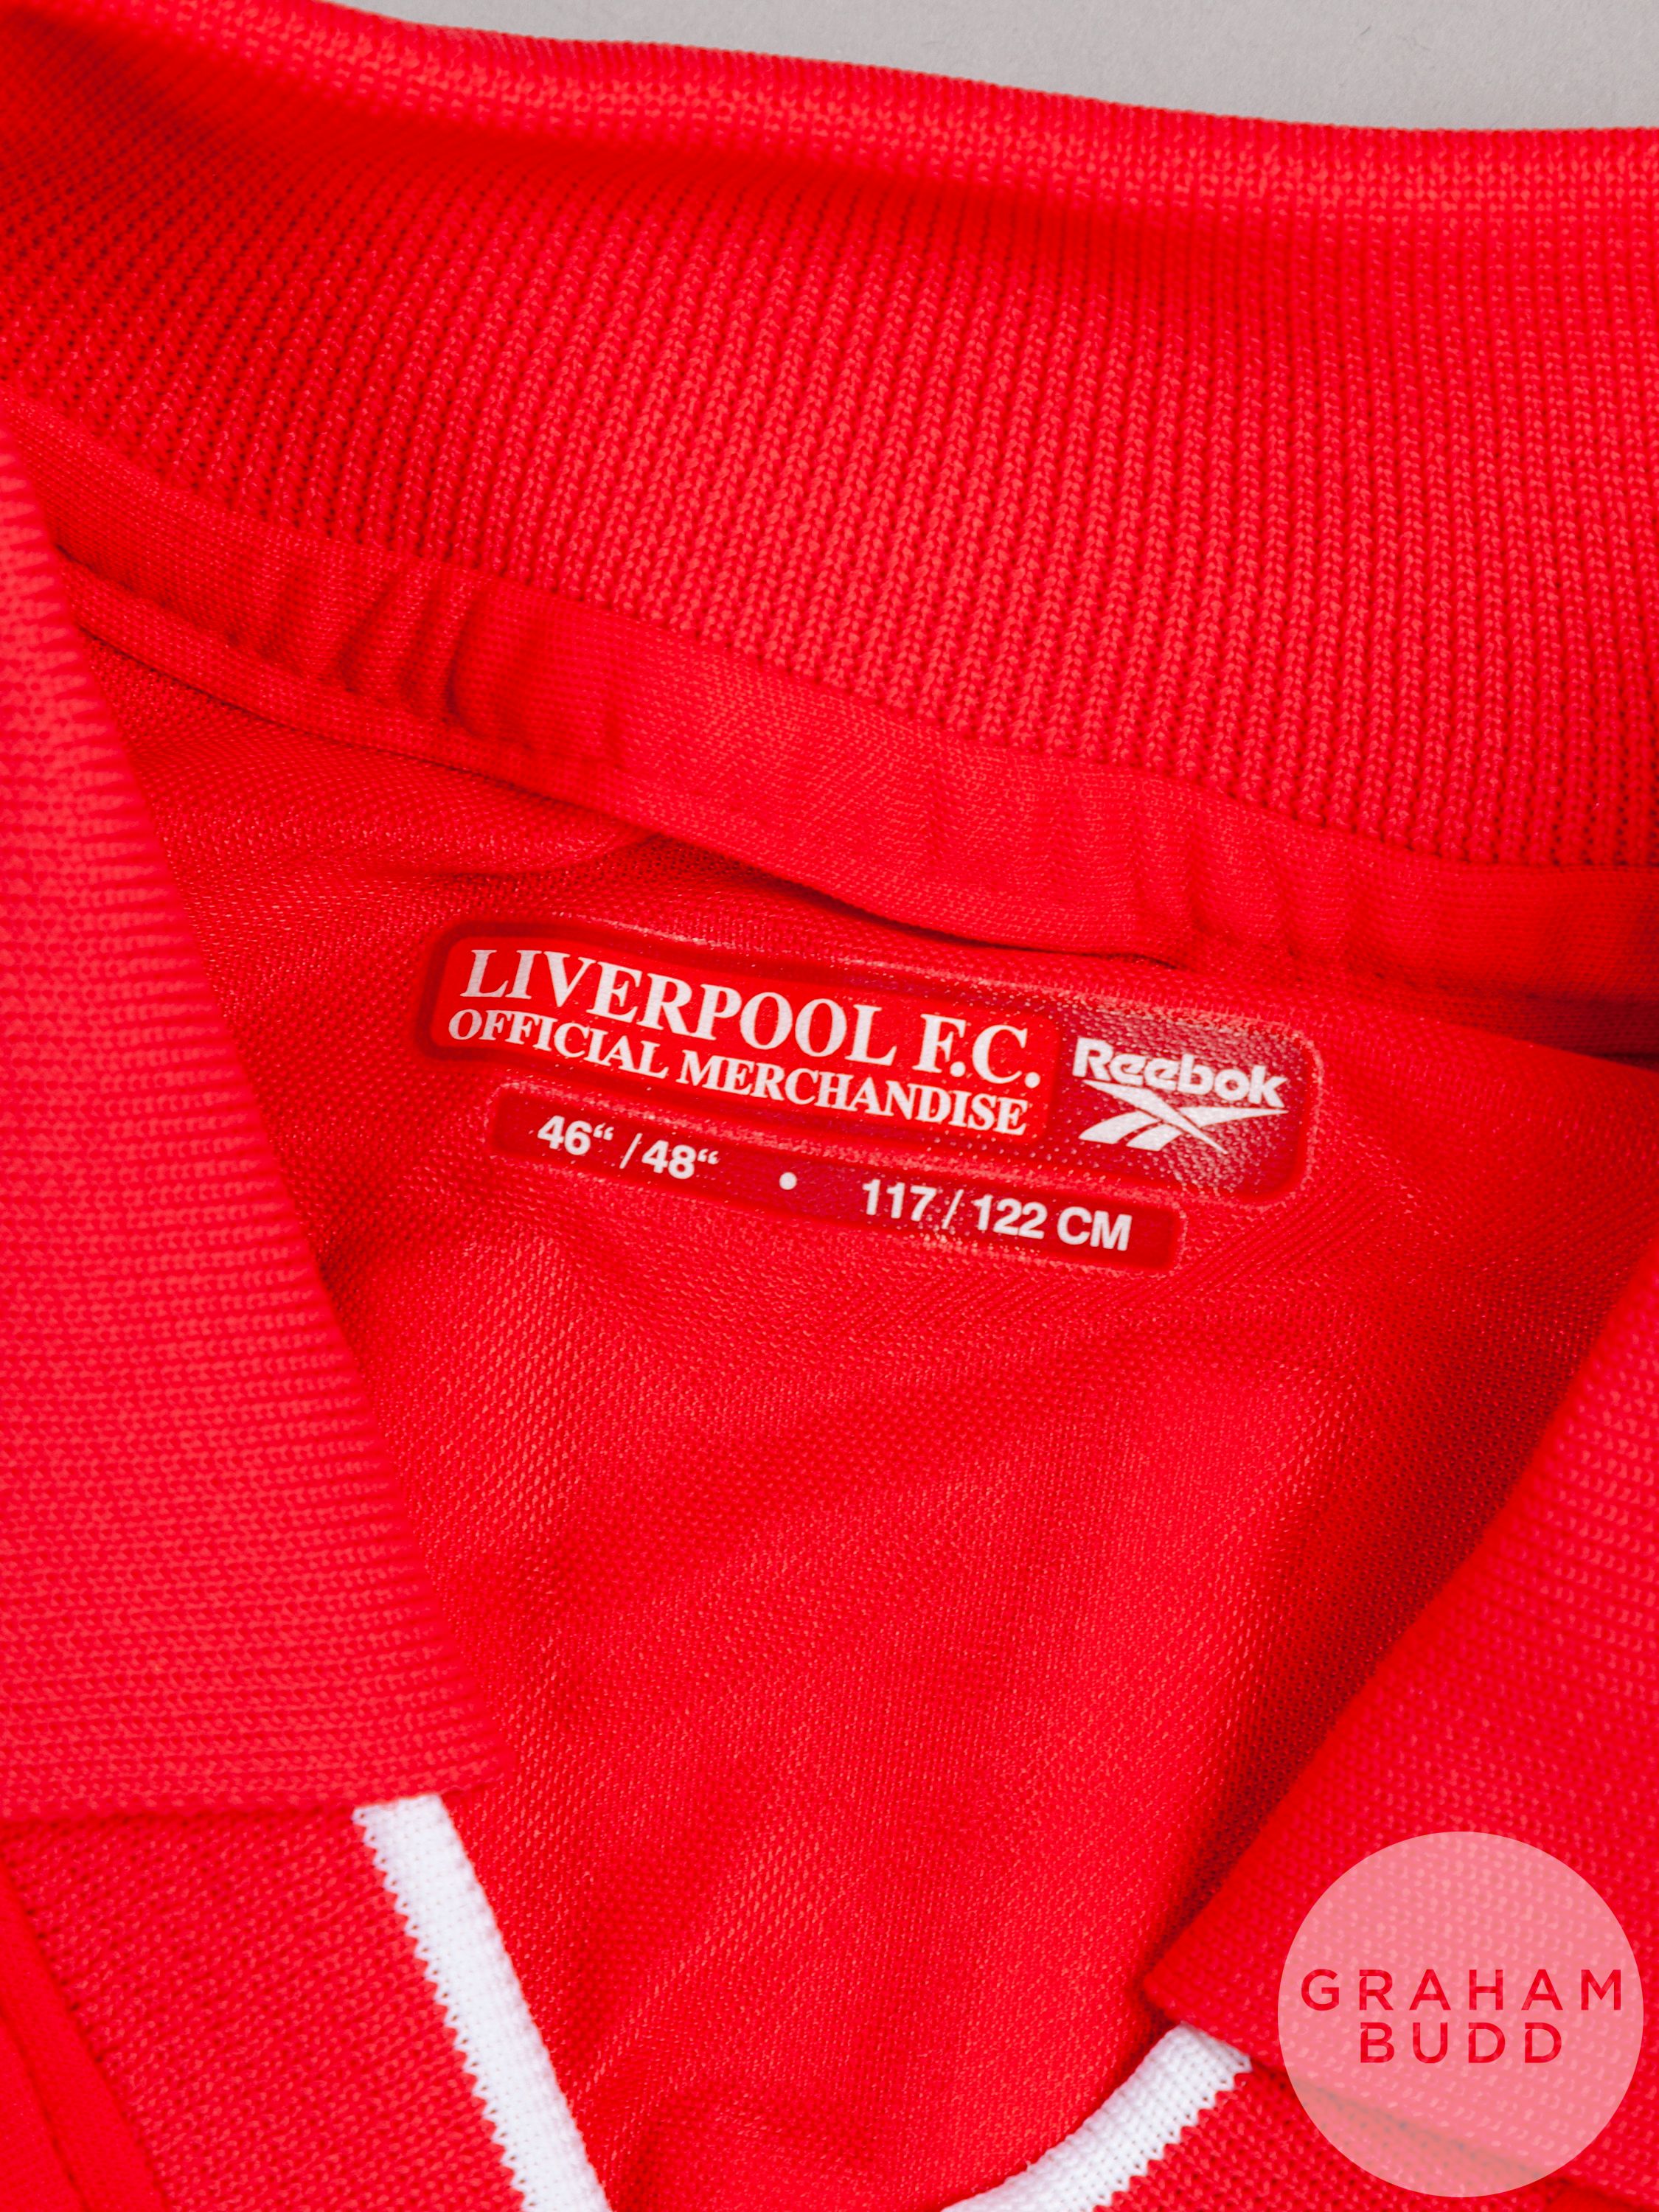 Alex Miller red and white Liverpool Treble Cup-winning commemorative shirt - Image 4 of 4